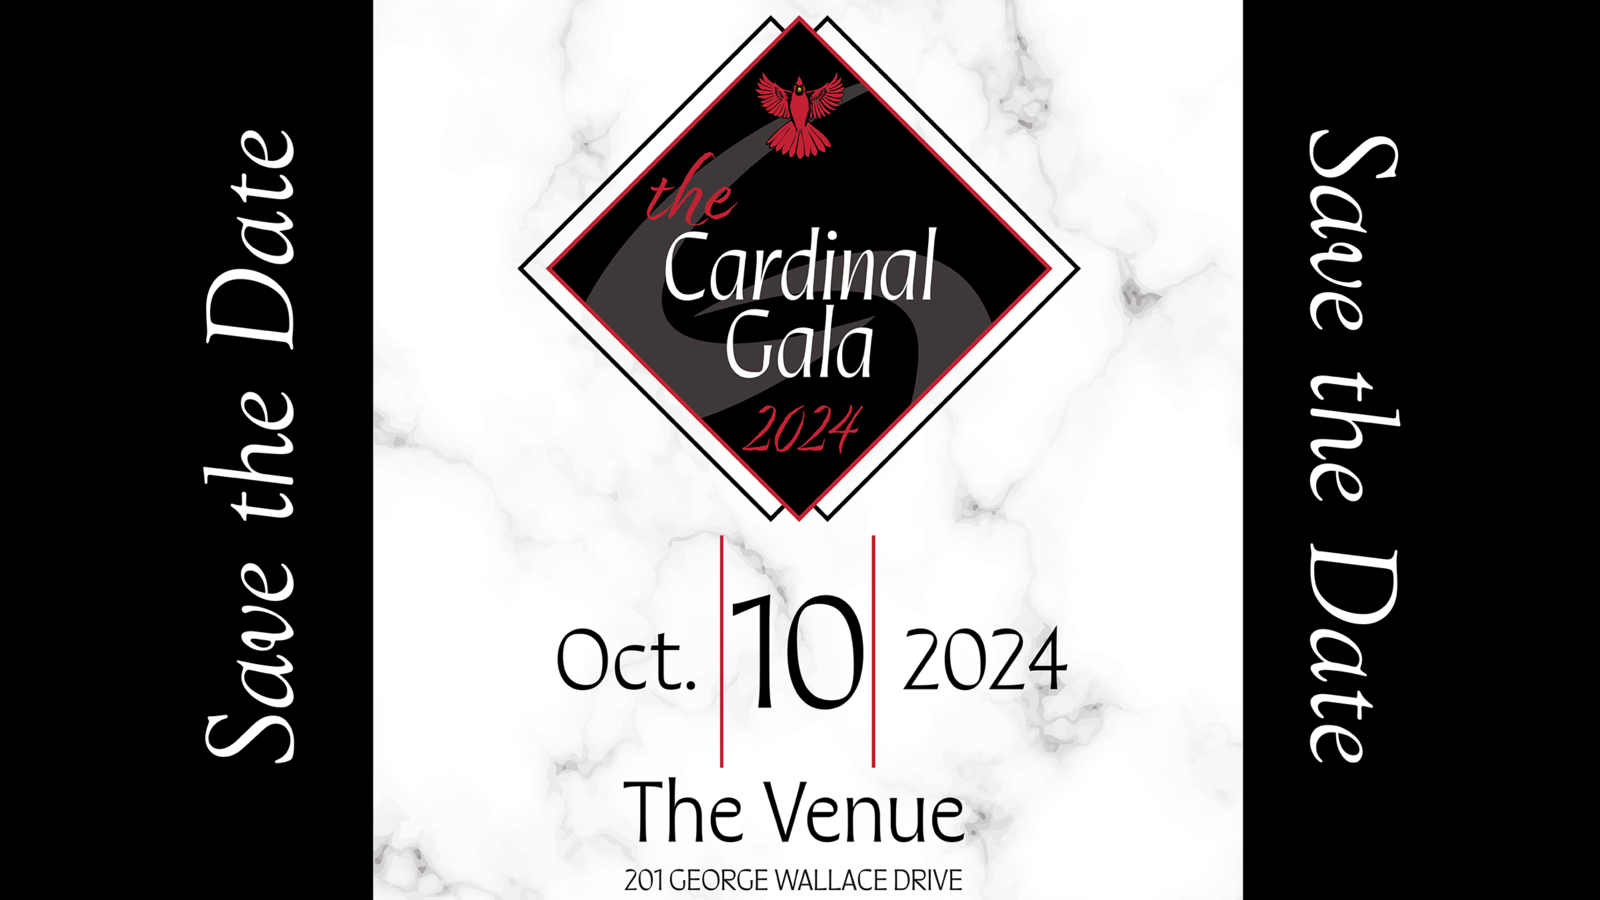 Cardinal Gala Save the Date for Oct. 10, 2024